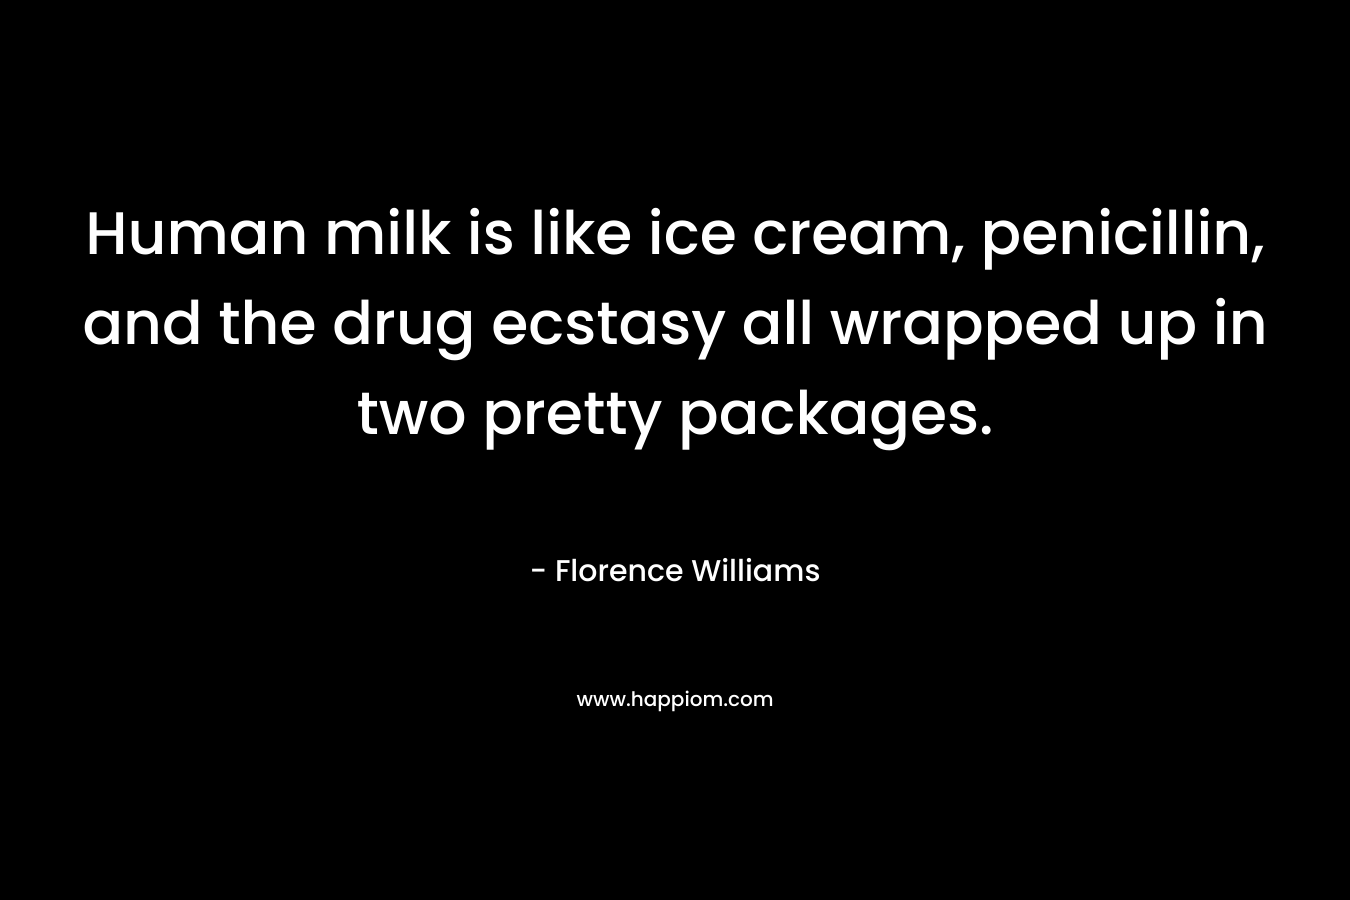 Human milk is like ice cream, penicillin, and the drug ecstasy all wrapped up in two pretty packages. – Florence   Williams